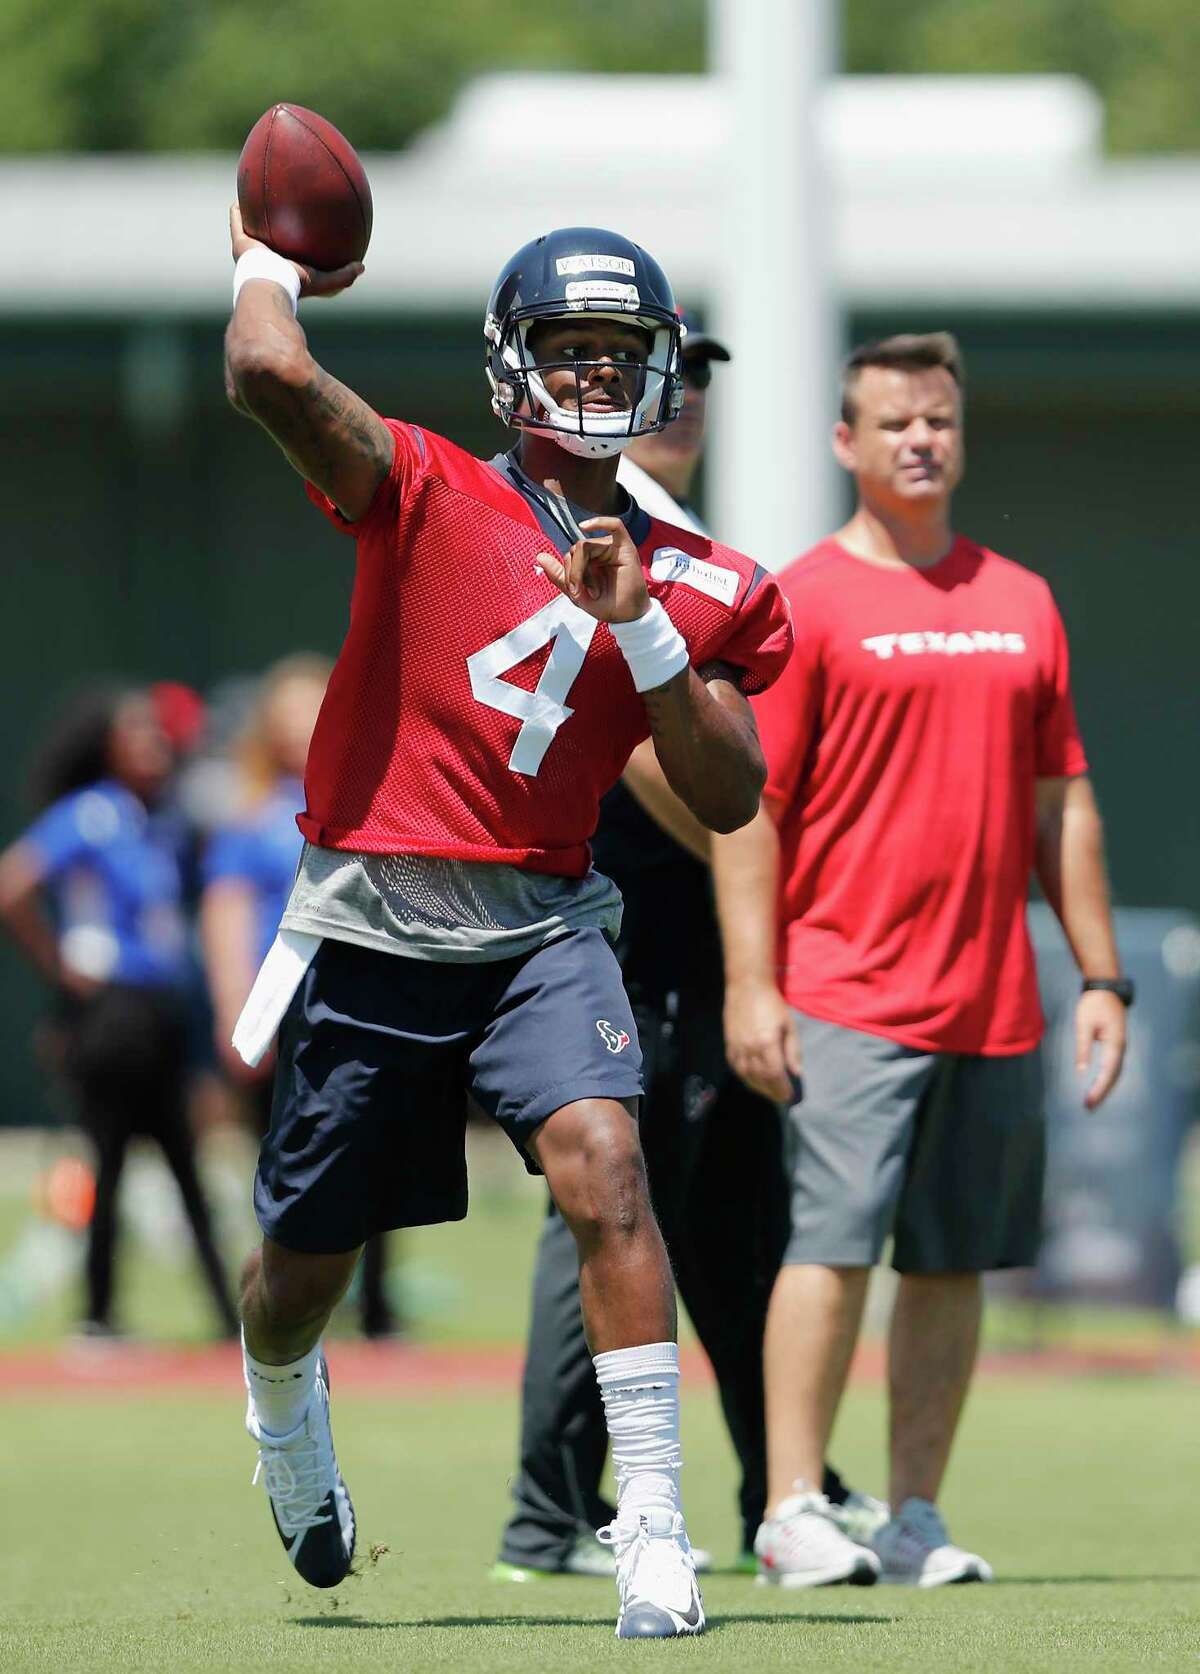 Deshaun Watson is the man the fans are eager to see, but the coaches likely will exercise more patience and let him develop behind Tom Savage for as long as that pecking order works for the Texans.